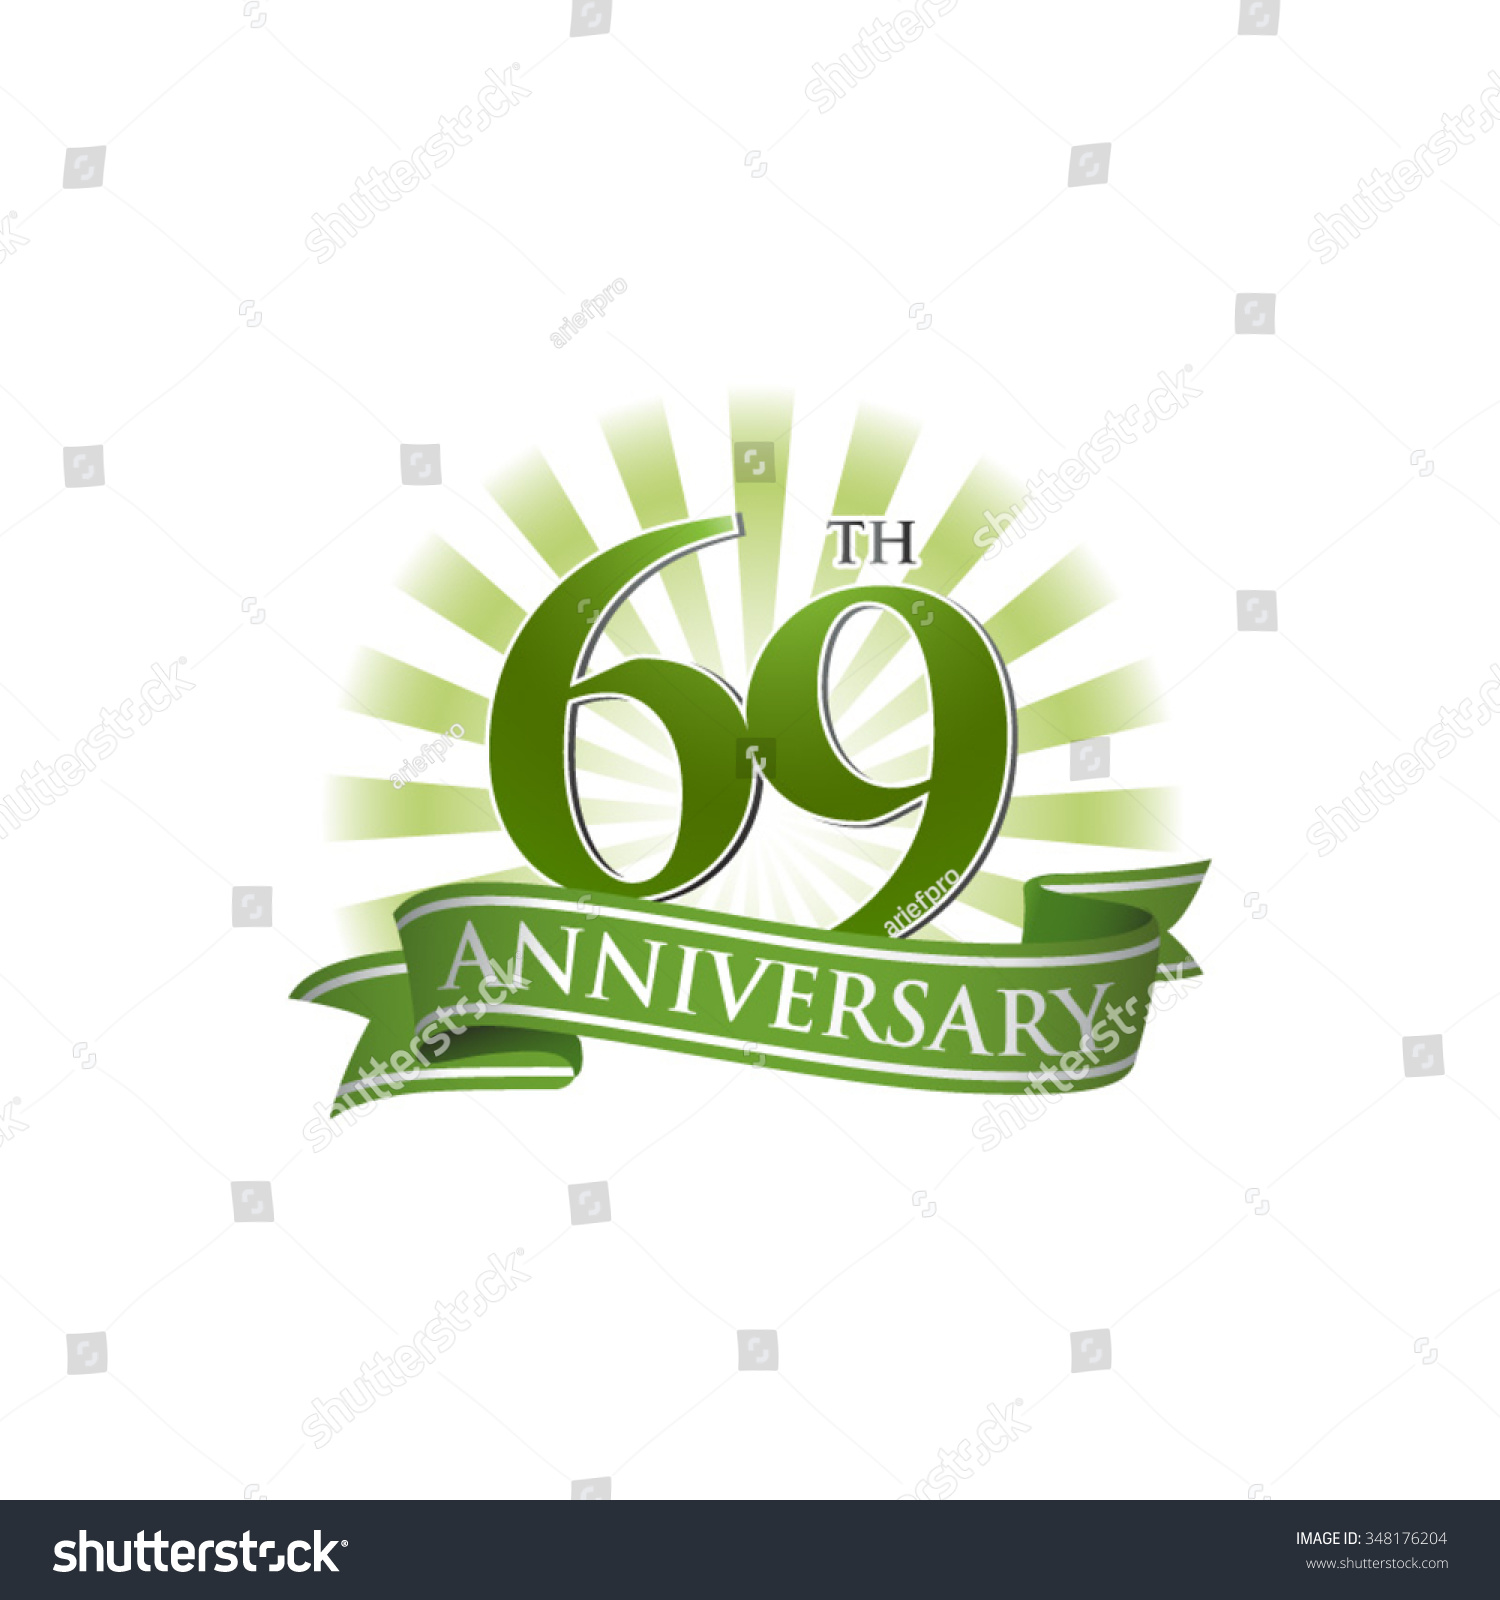 69th anniversary ribbon logo with green rays of - Royalty Free Stock ...